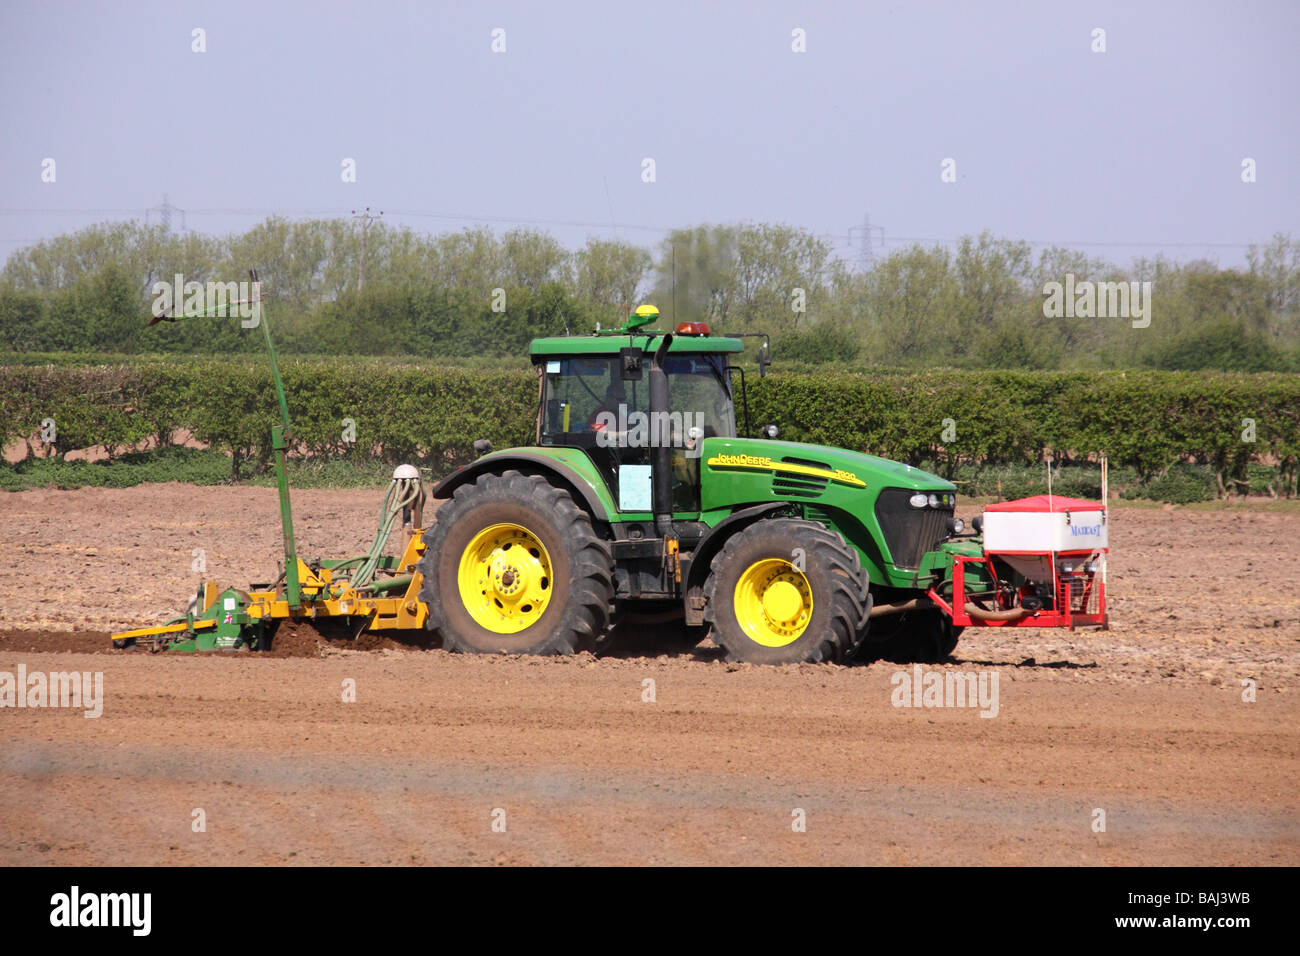 john deere green tractor working in a field sowing seed Stock Photo